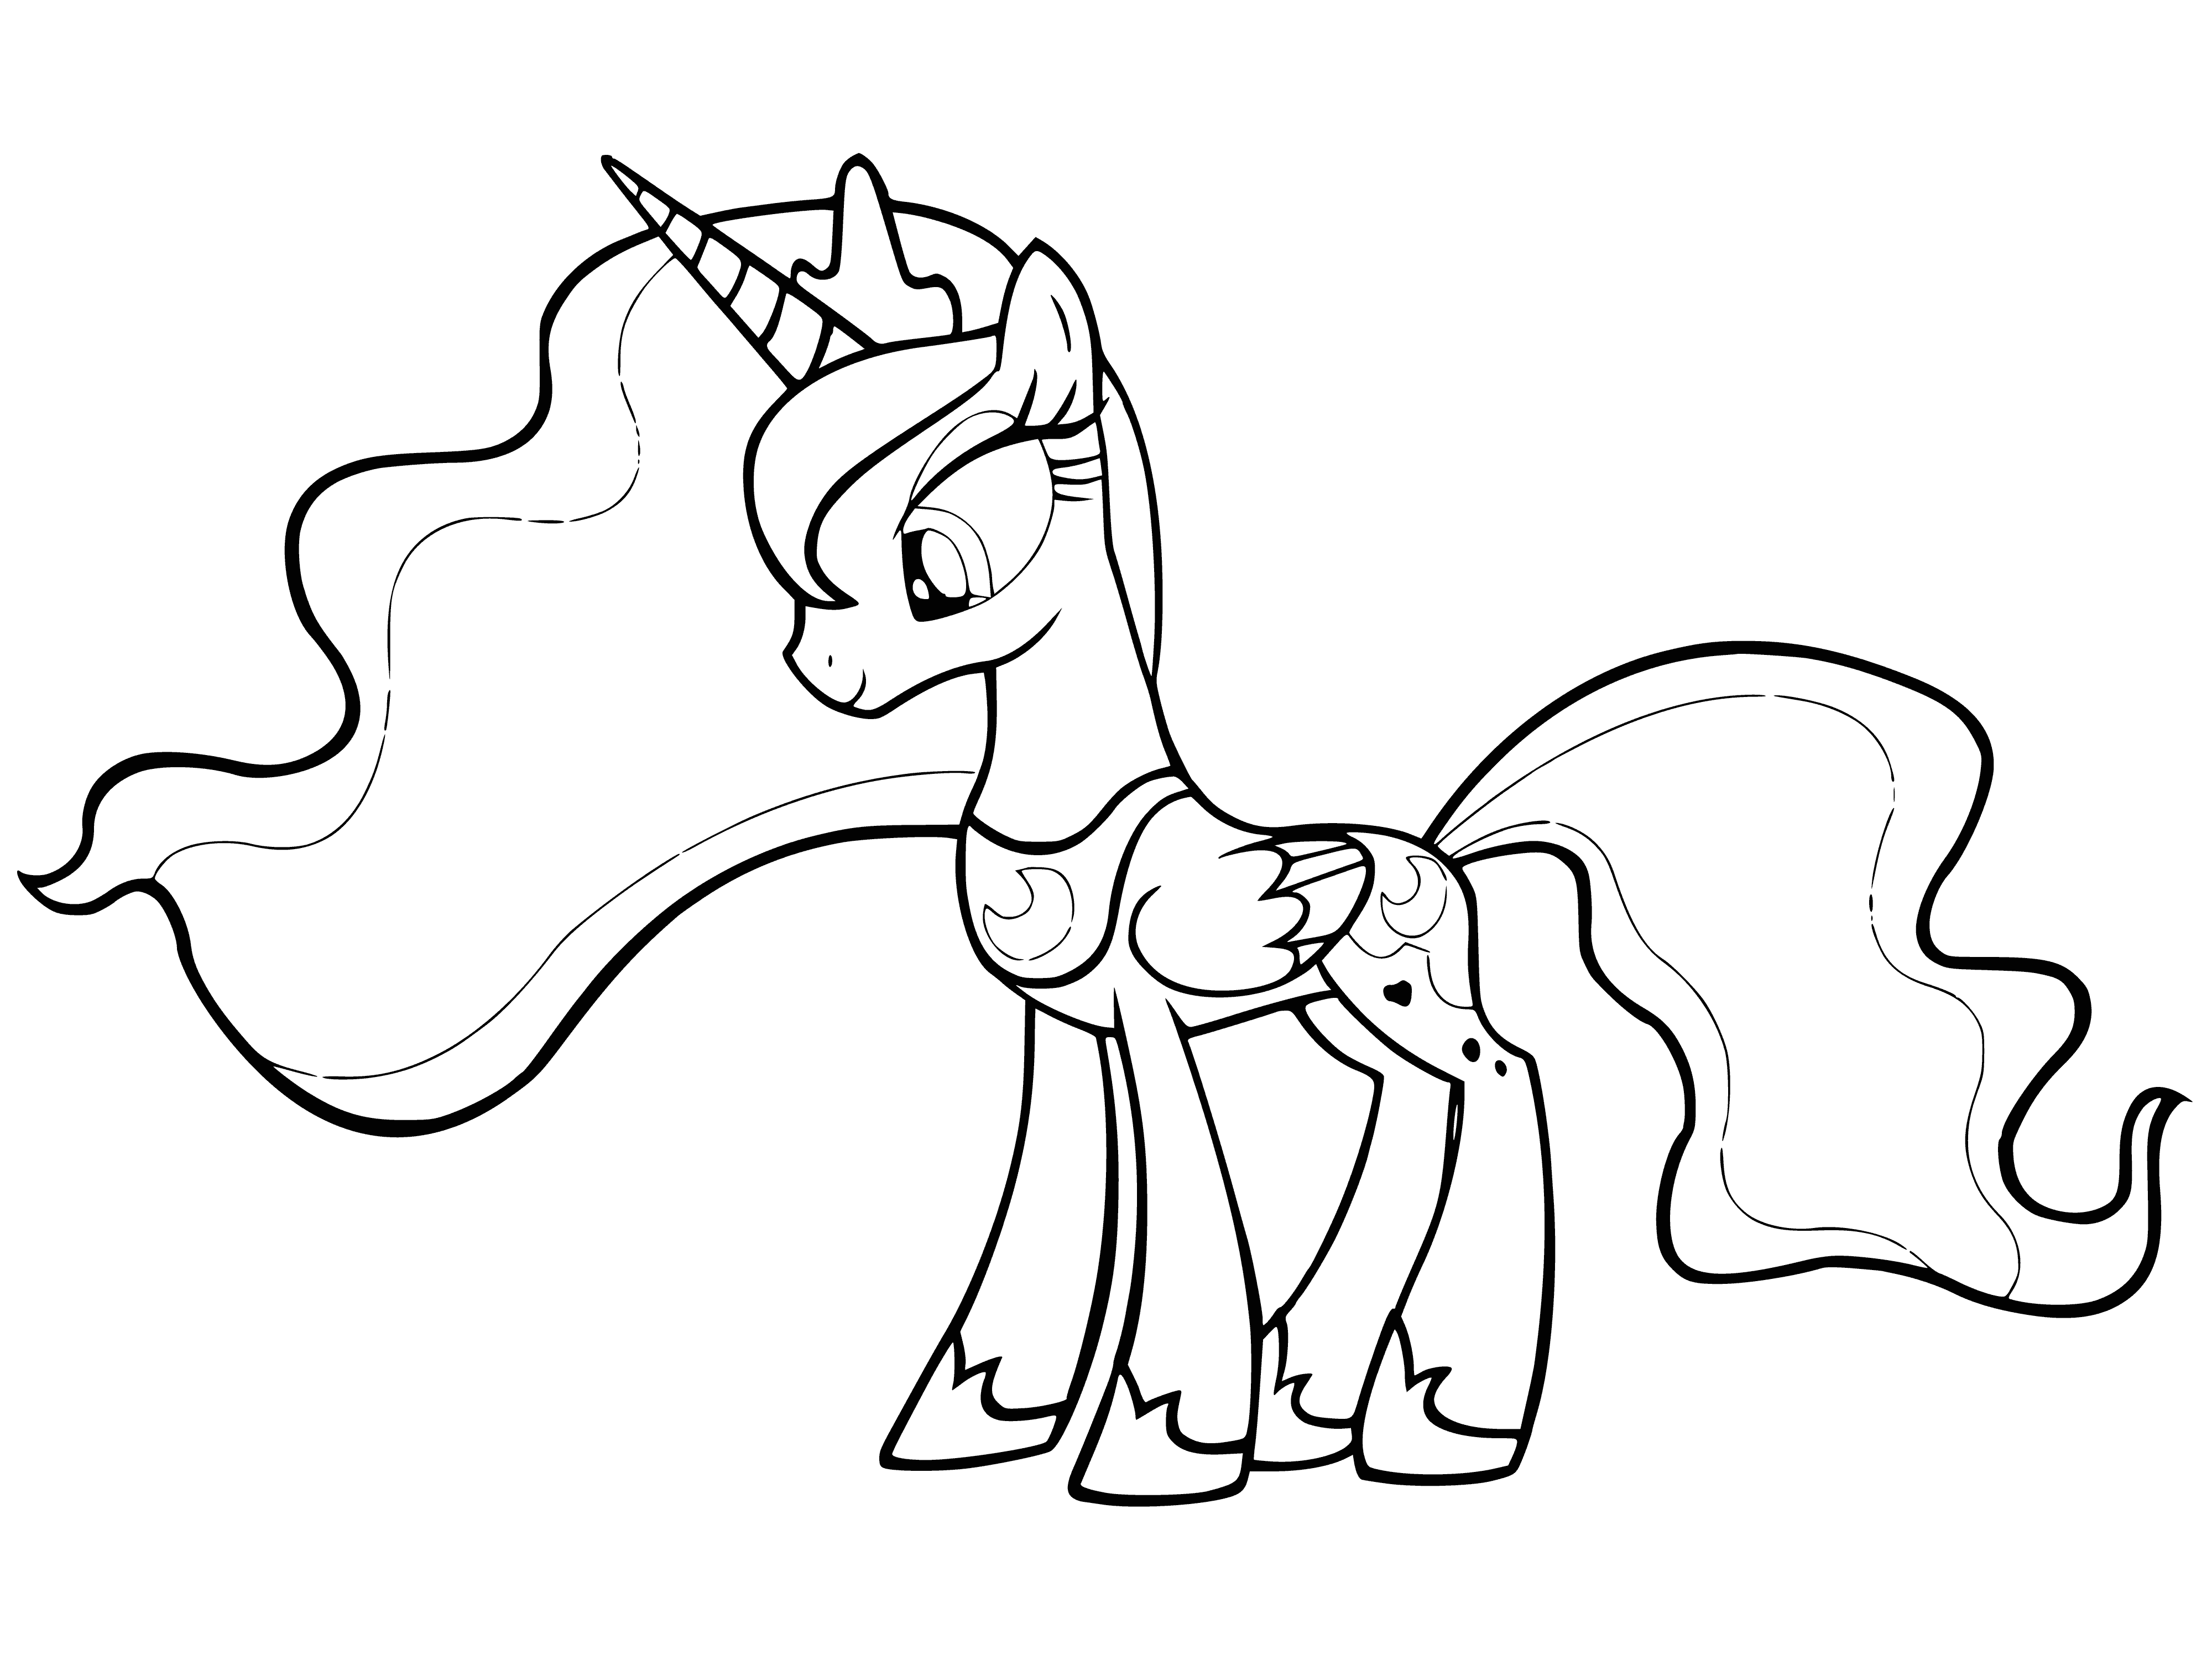 coloring page: Princess Luna has a long mane & tail with a white crescent moon on her forehead, wearing a golden tiara & blue cape, standing on golden platform with 2 blue moons in background.